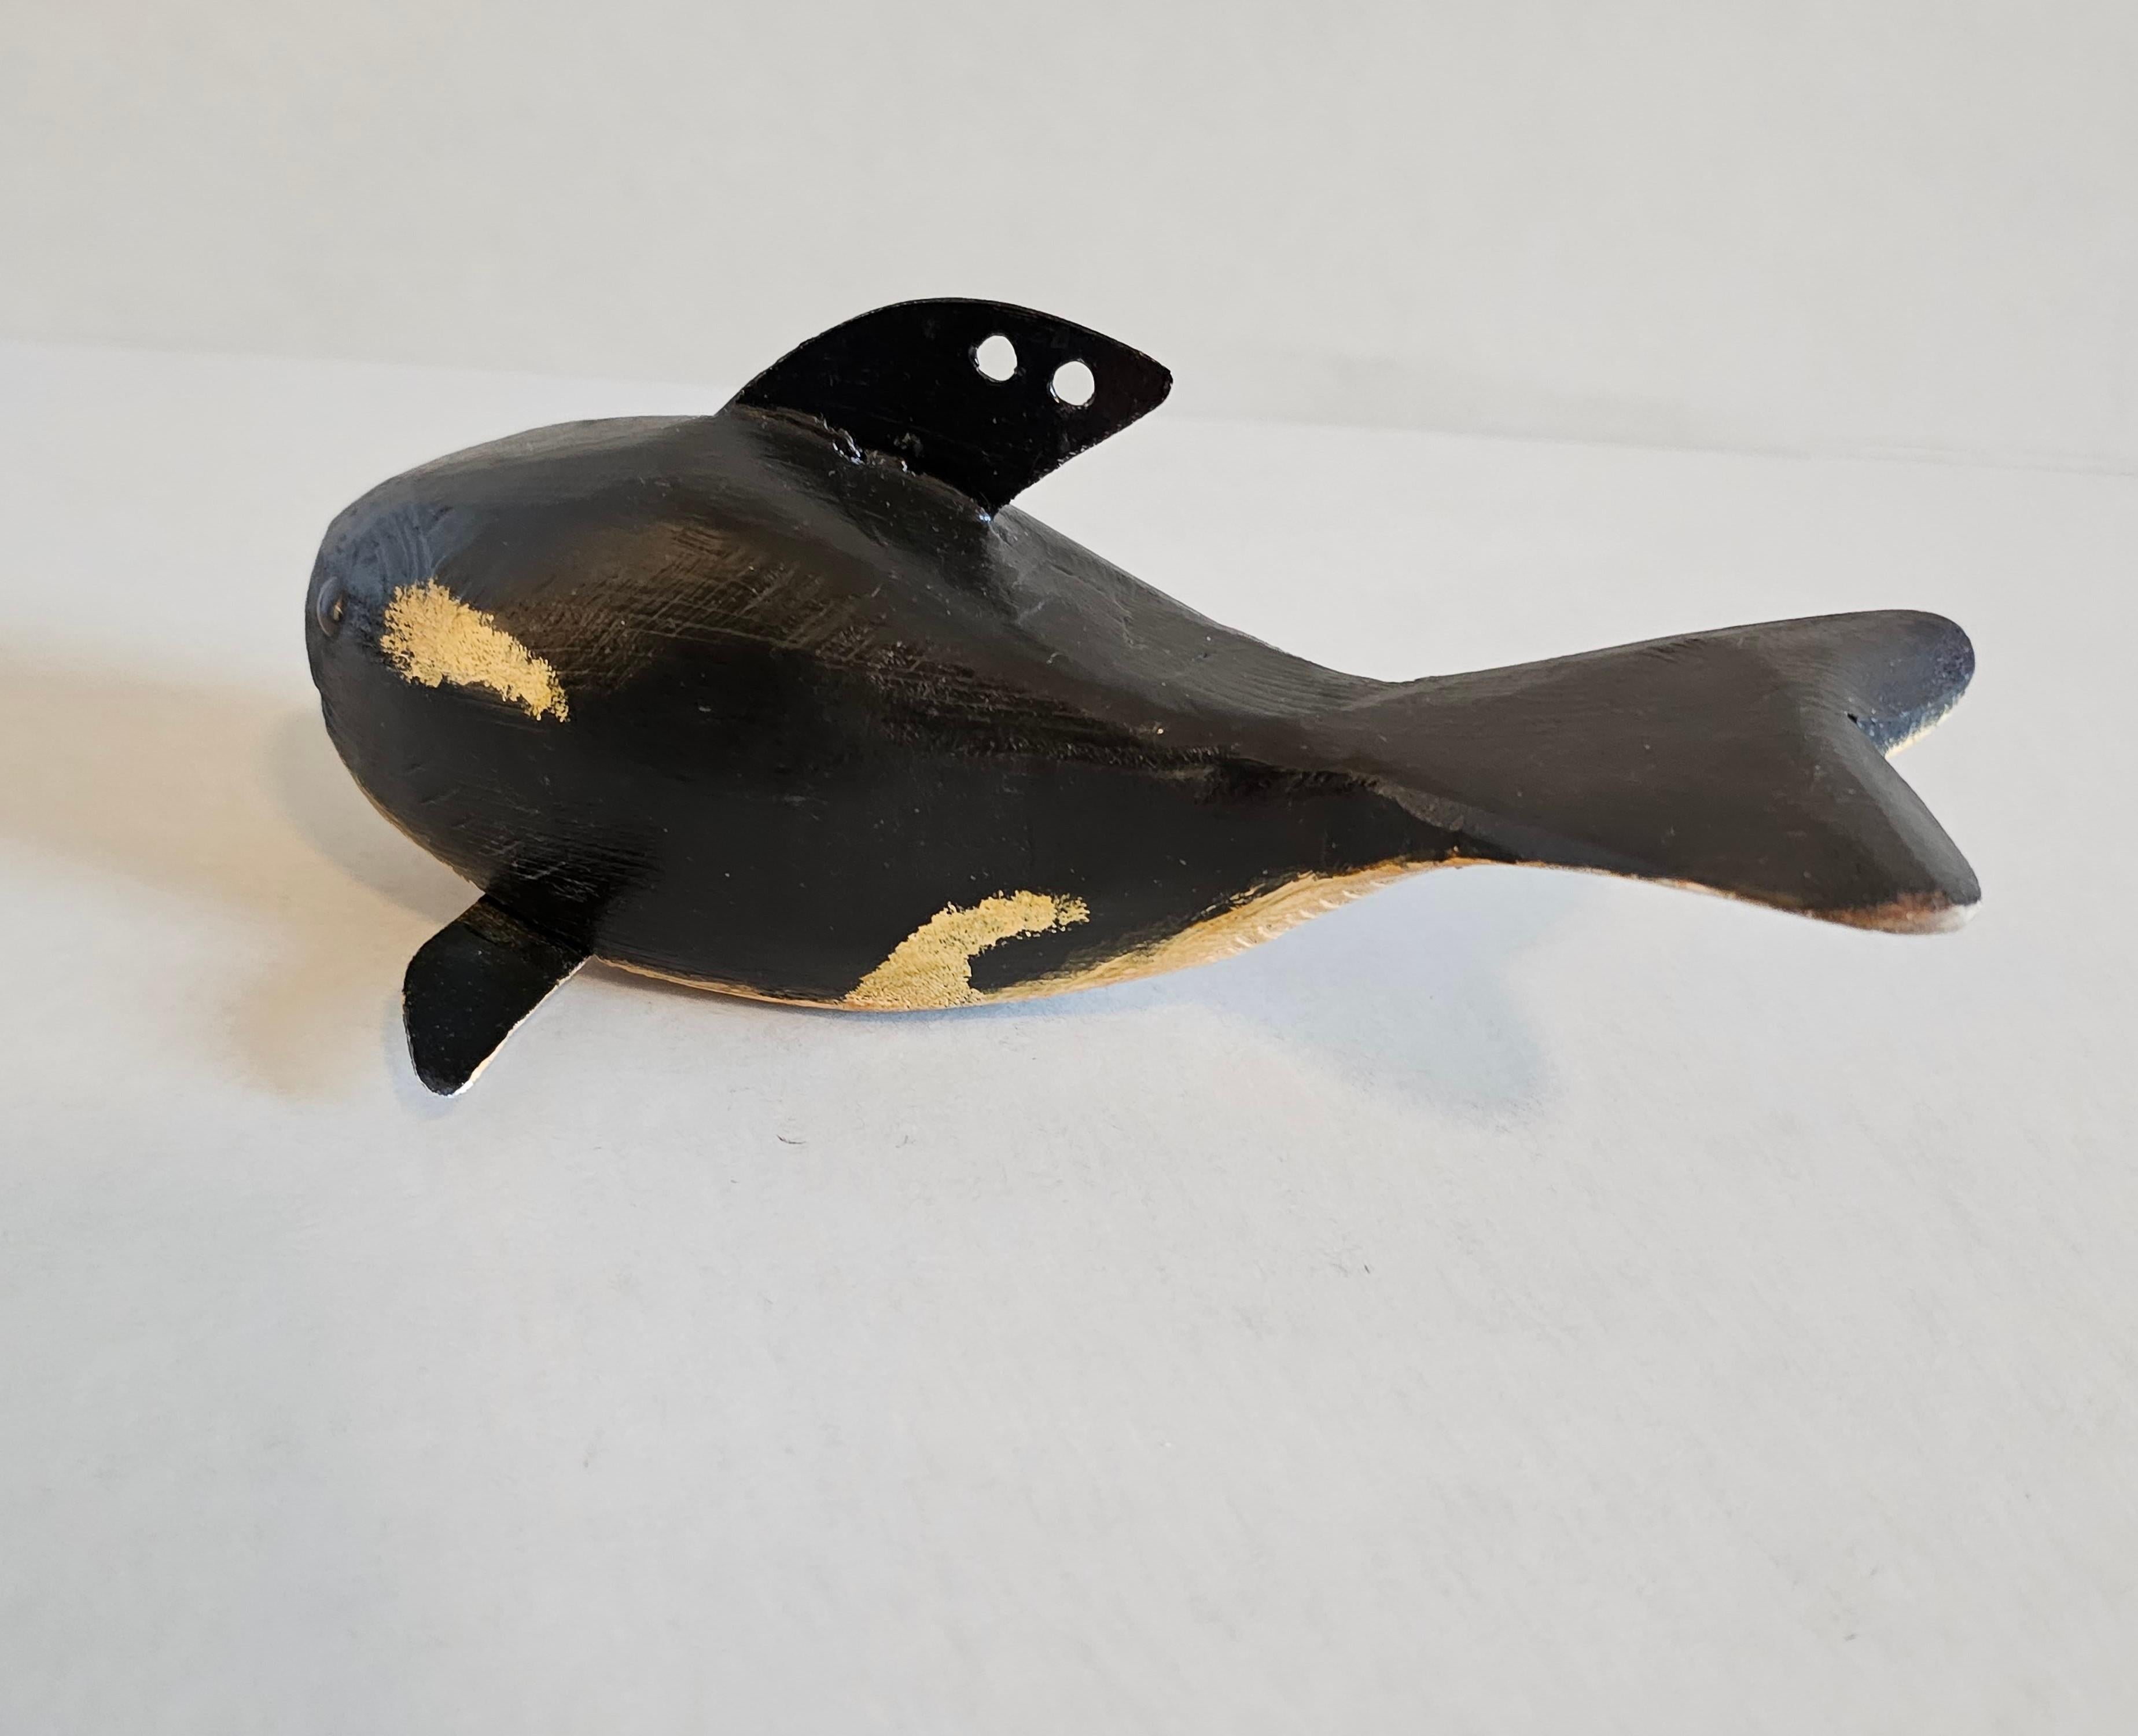 Duluth Fish Decoy American Folk Art Carved Painted Orca Killer Whale Sculpture In Good Condition For Sale In Forney, TX